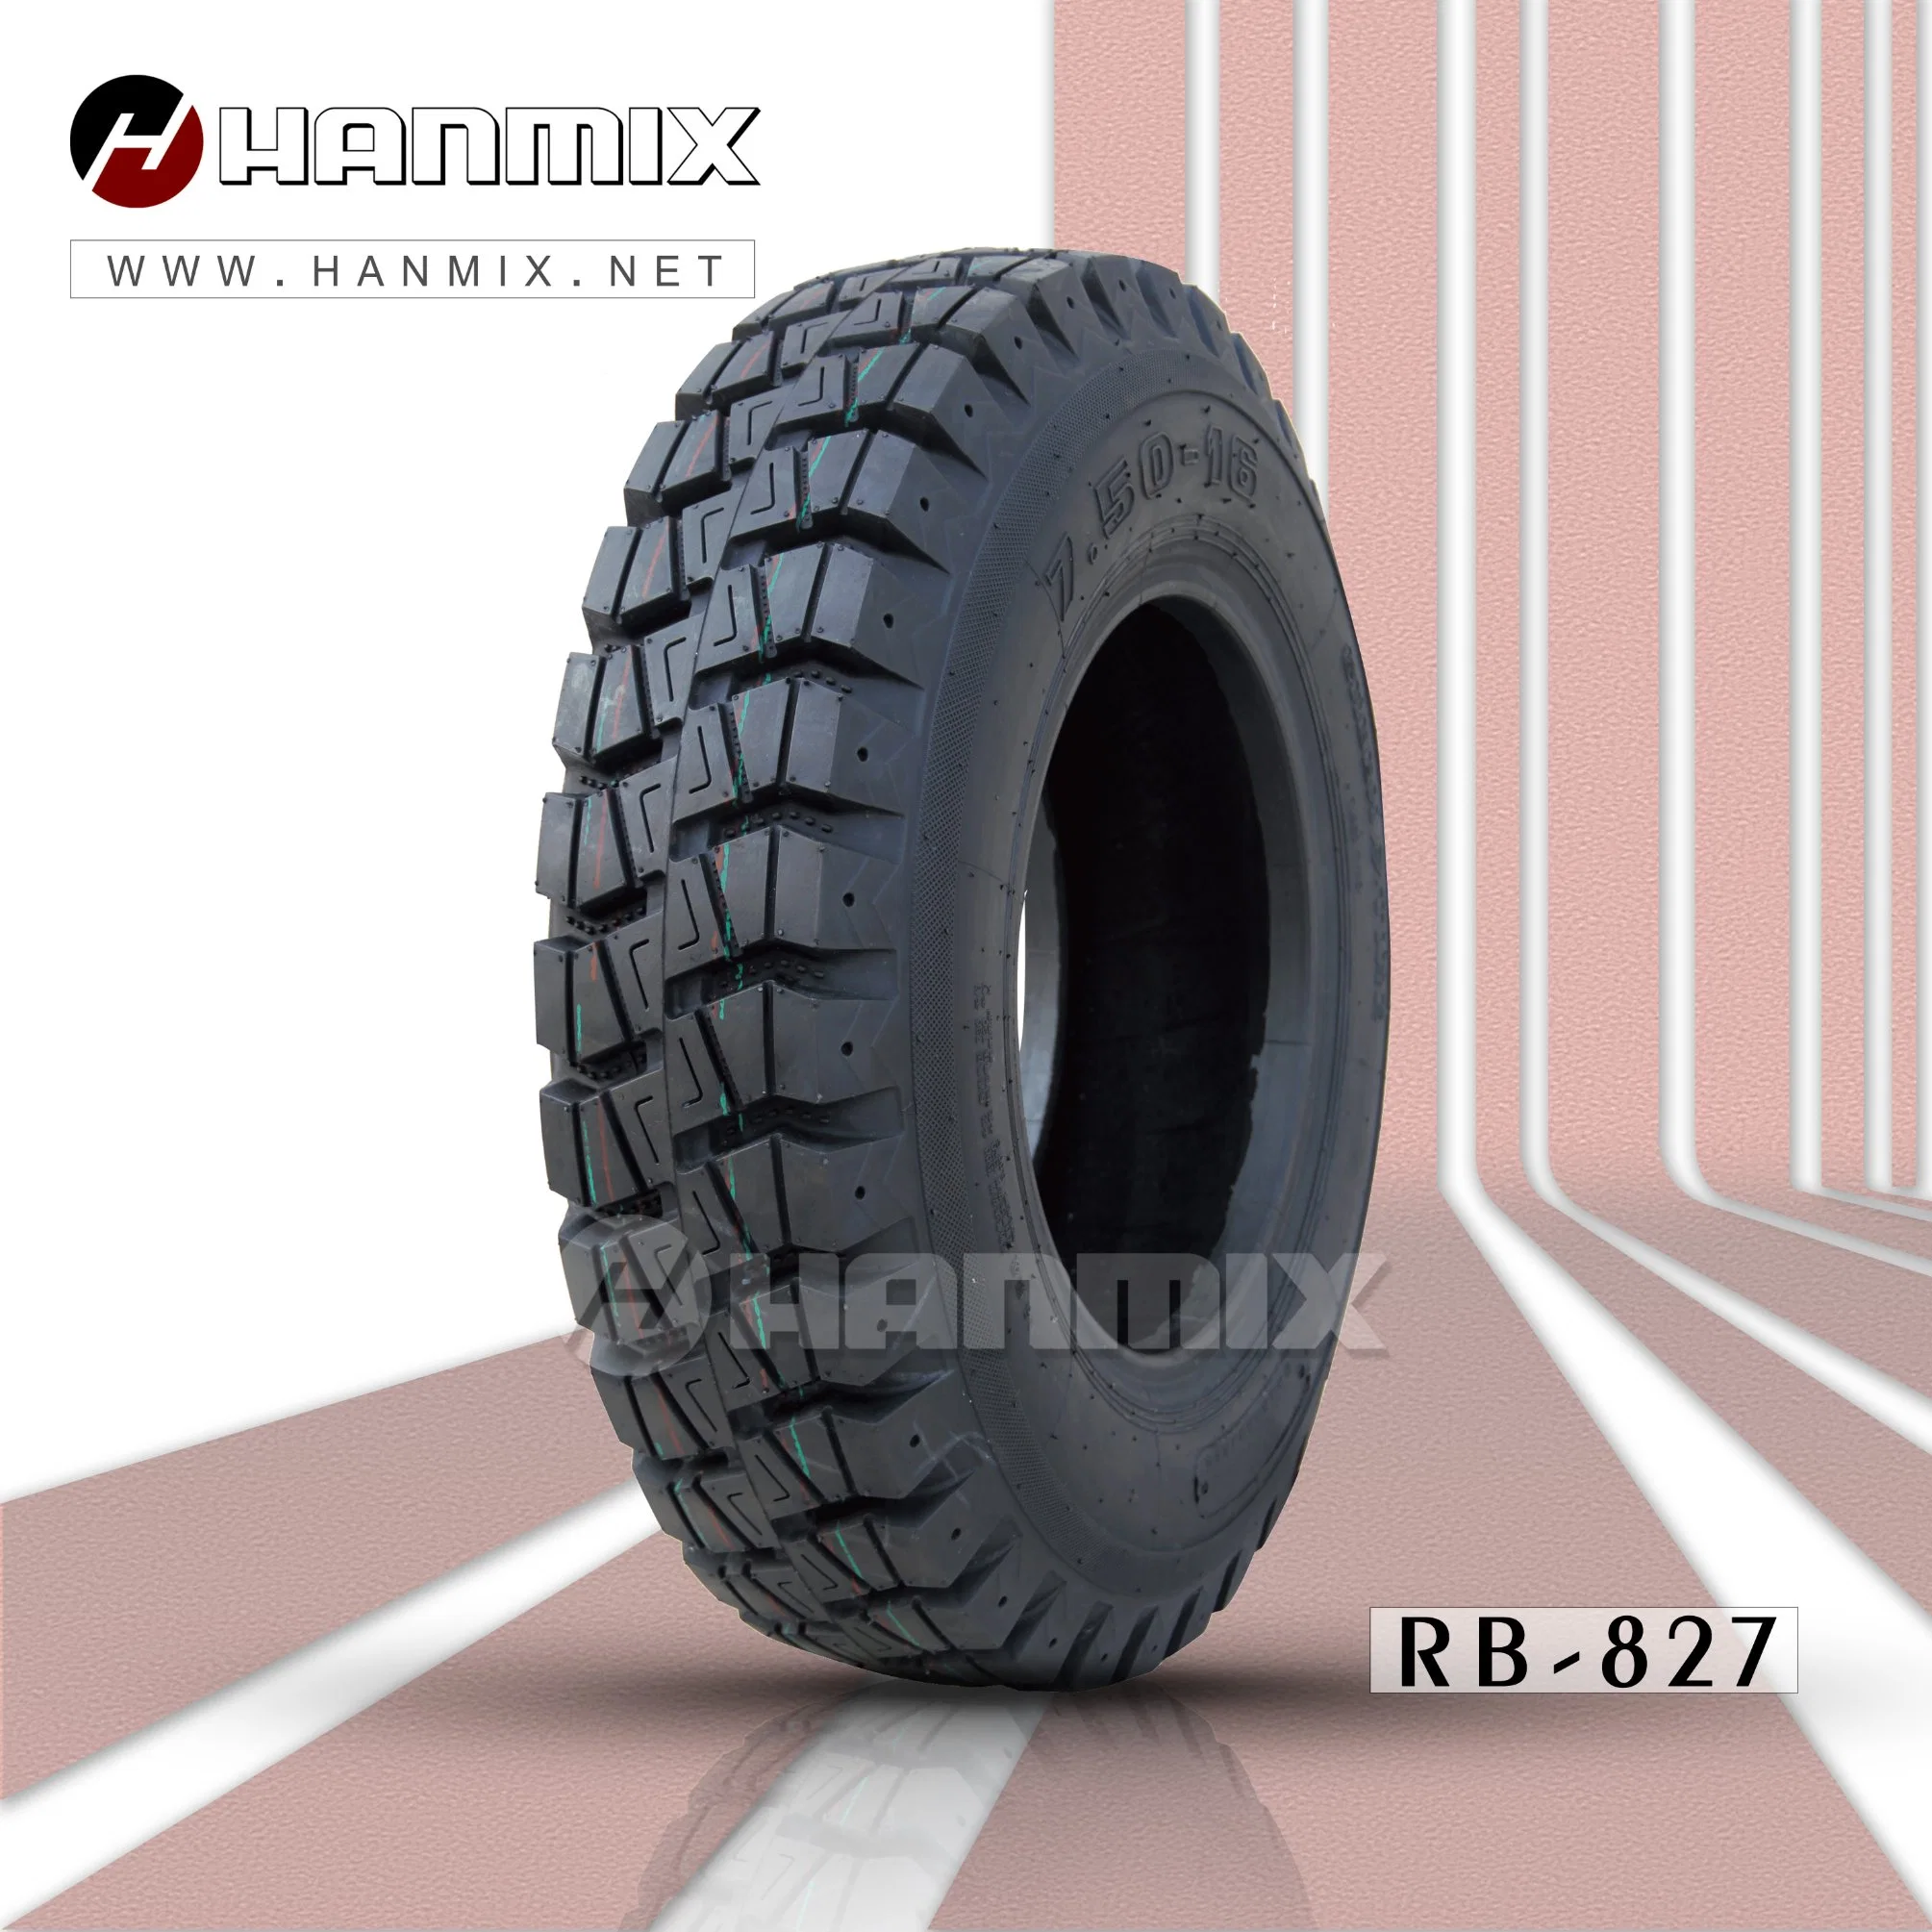 Hanmix Bias Industry Agriculture Rib Lug Grader Factory Loader Grade off The Road All Steel Tire Radial TBB Tyre 750-16 825-16